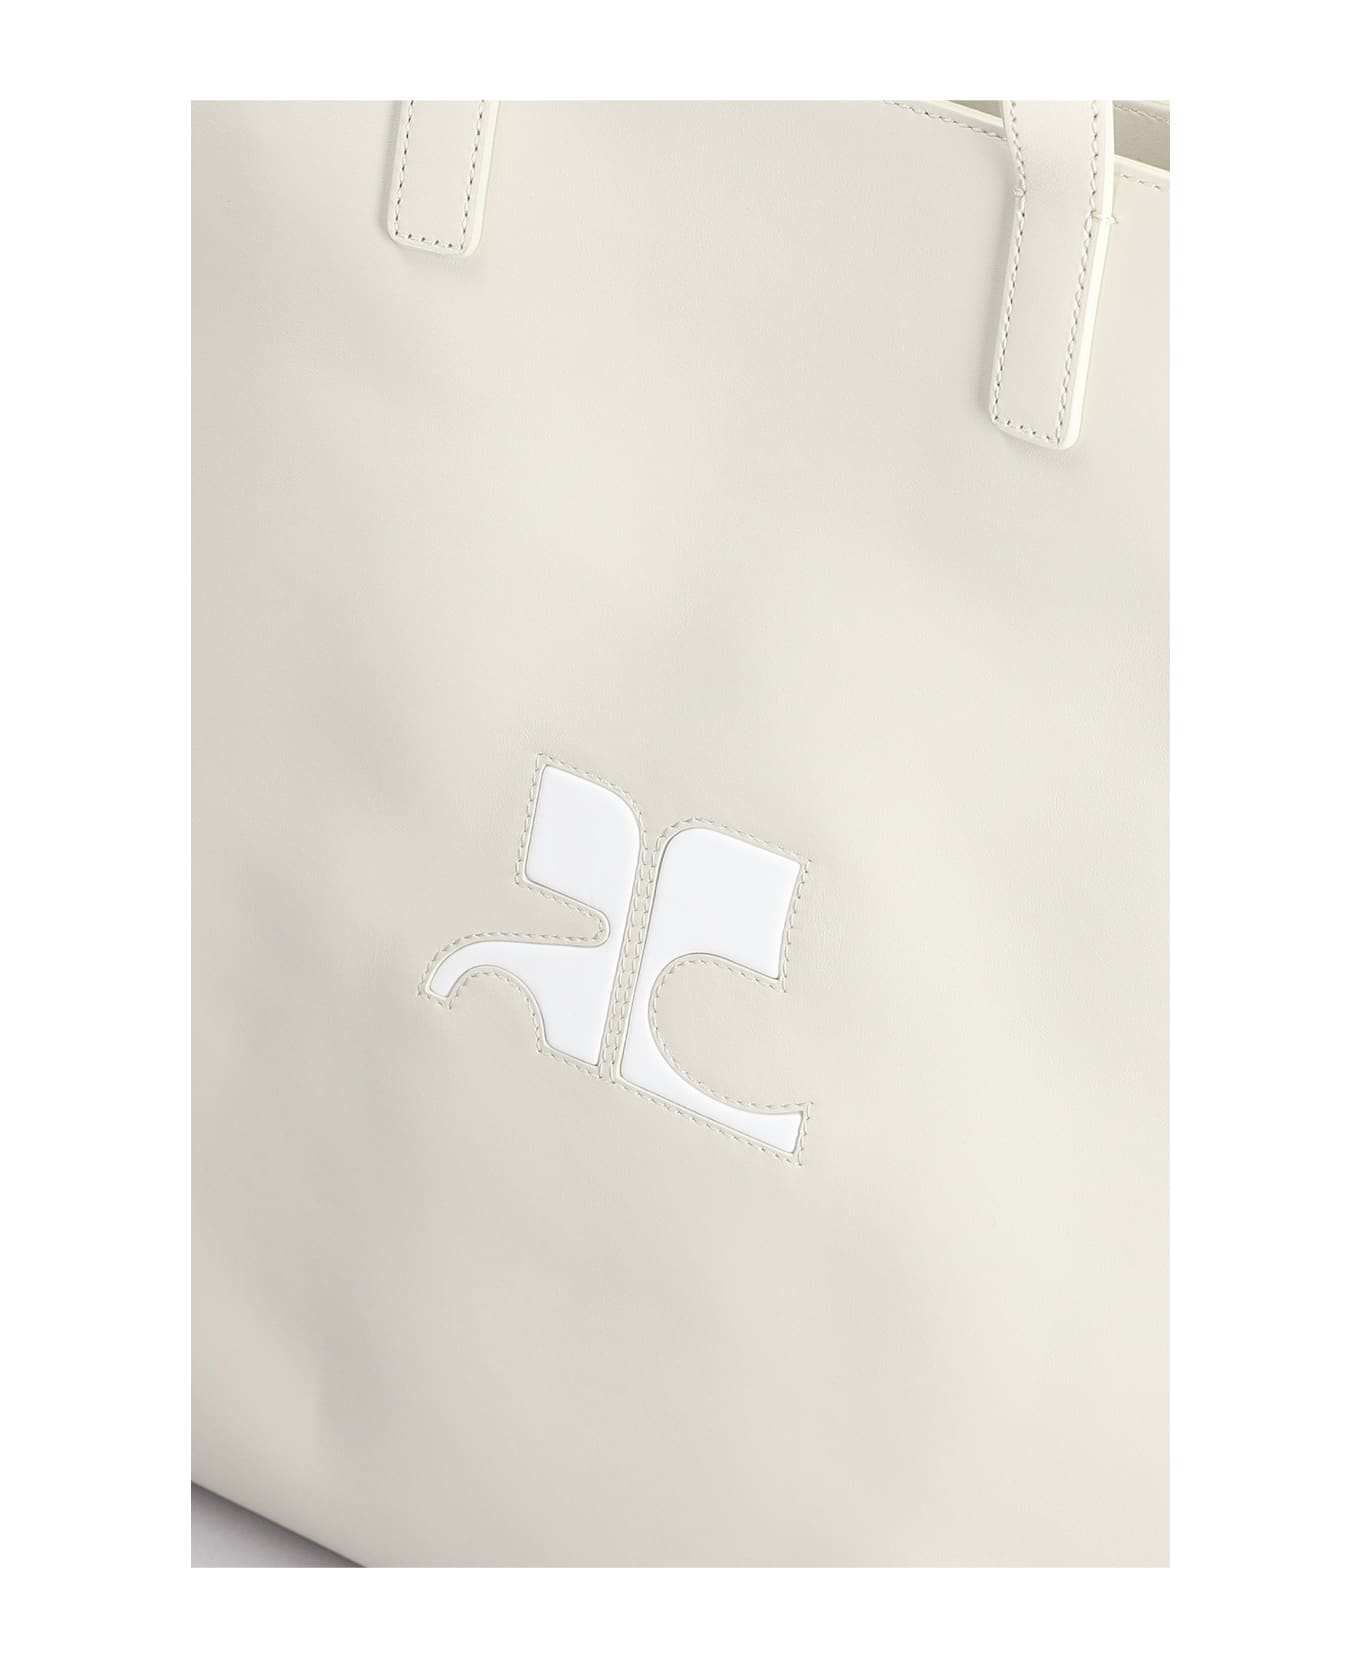 Courrèges Tote In Beige Leather - beige